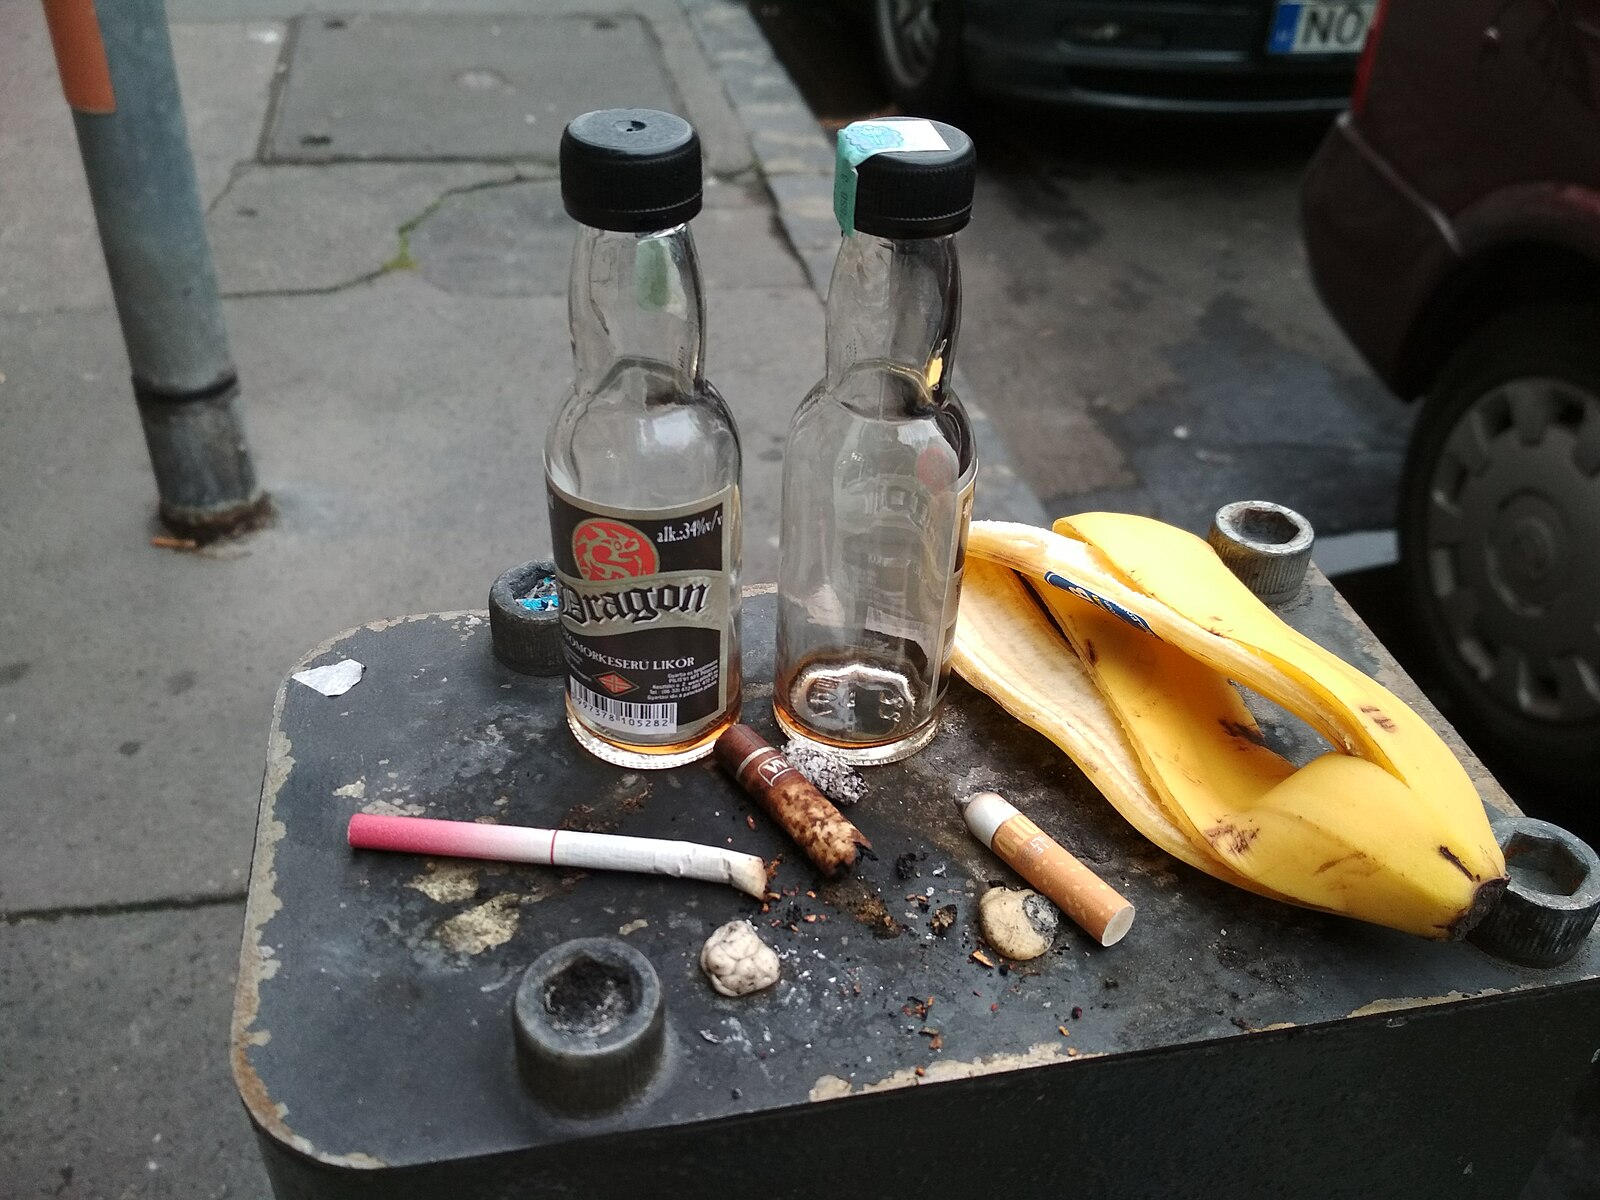 old bottles and cigarettes with a banana peel